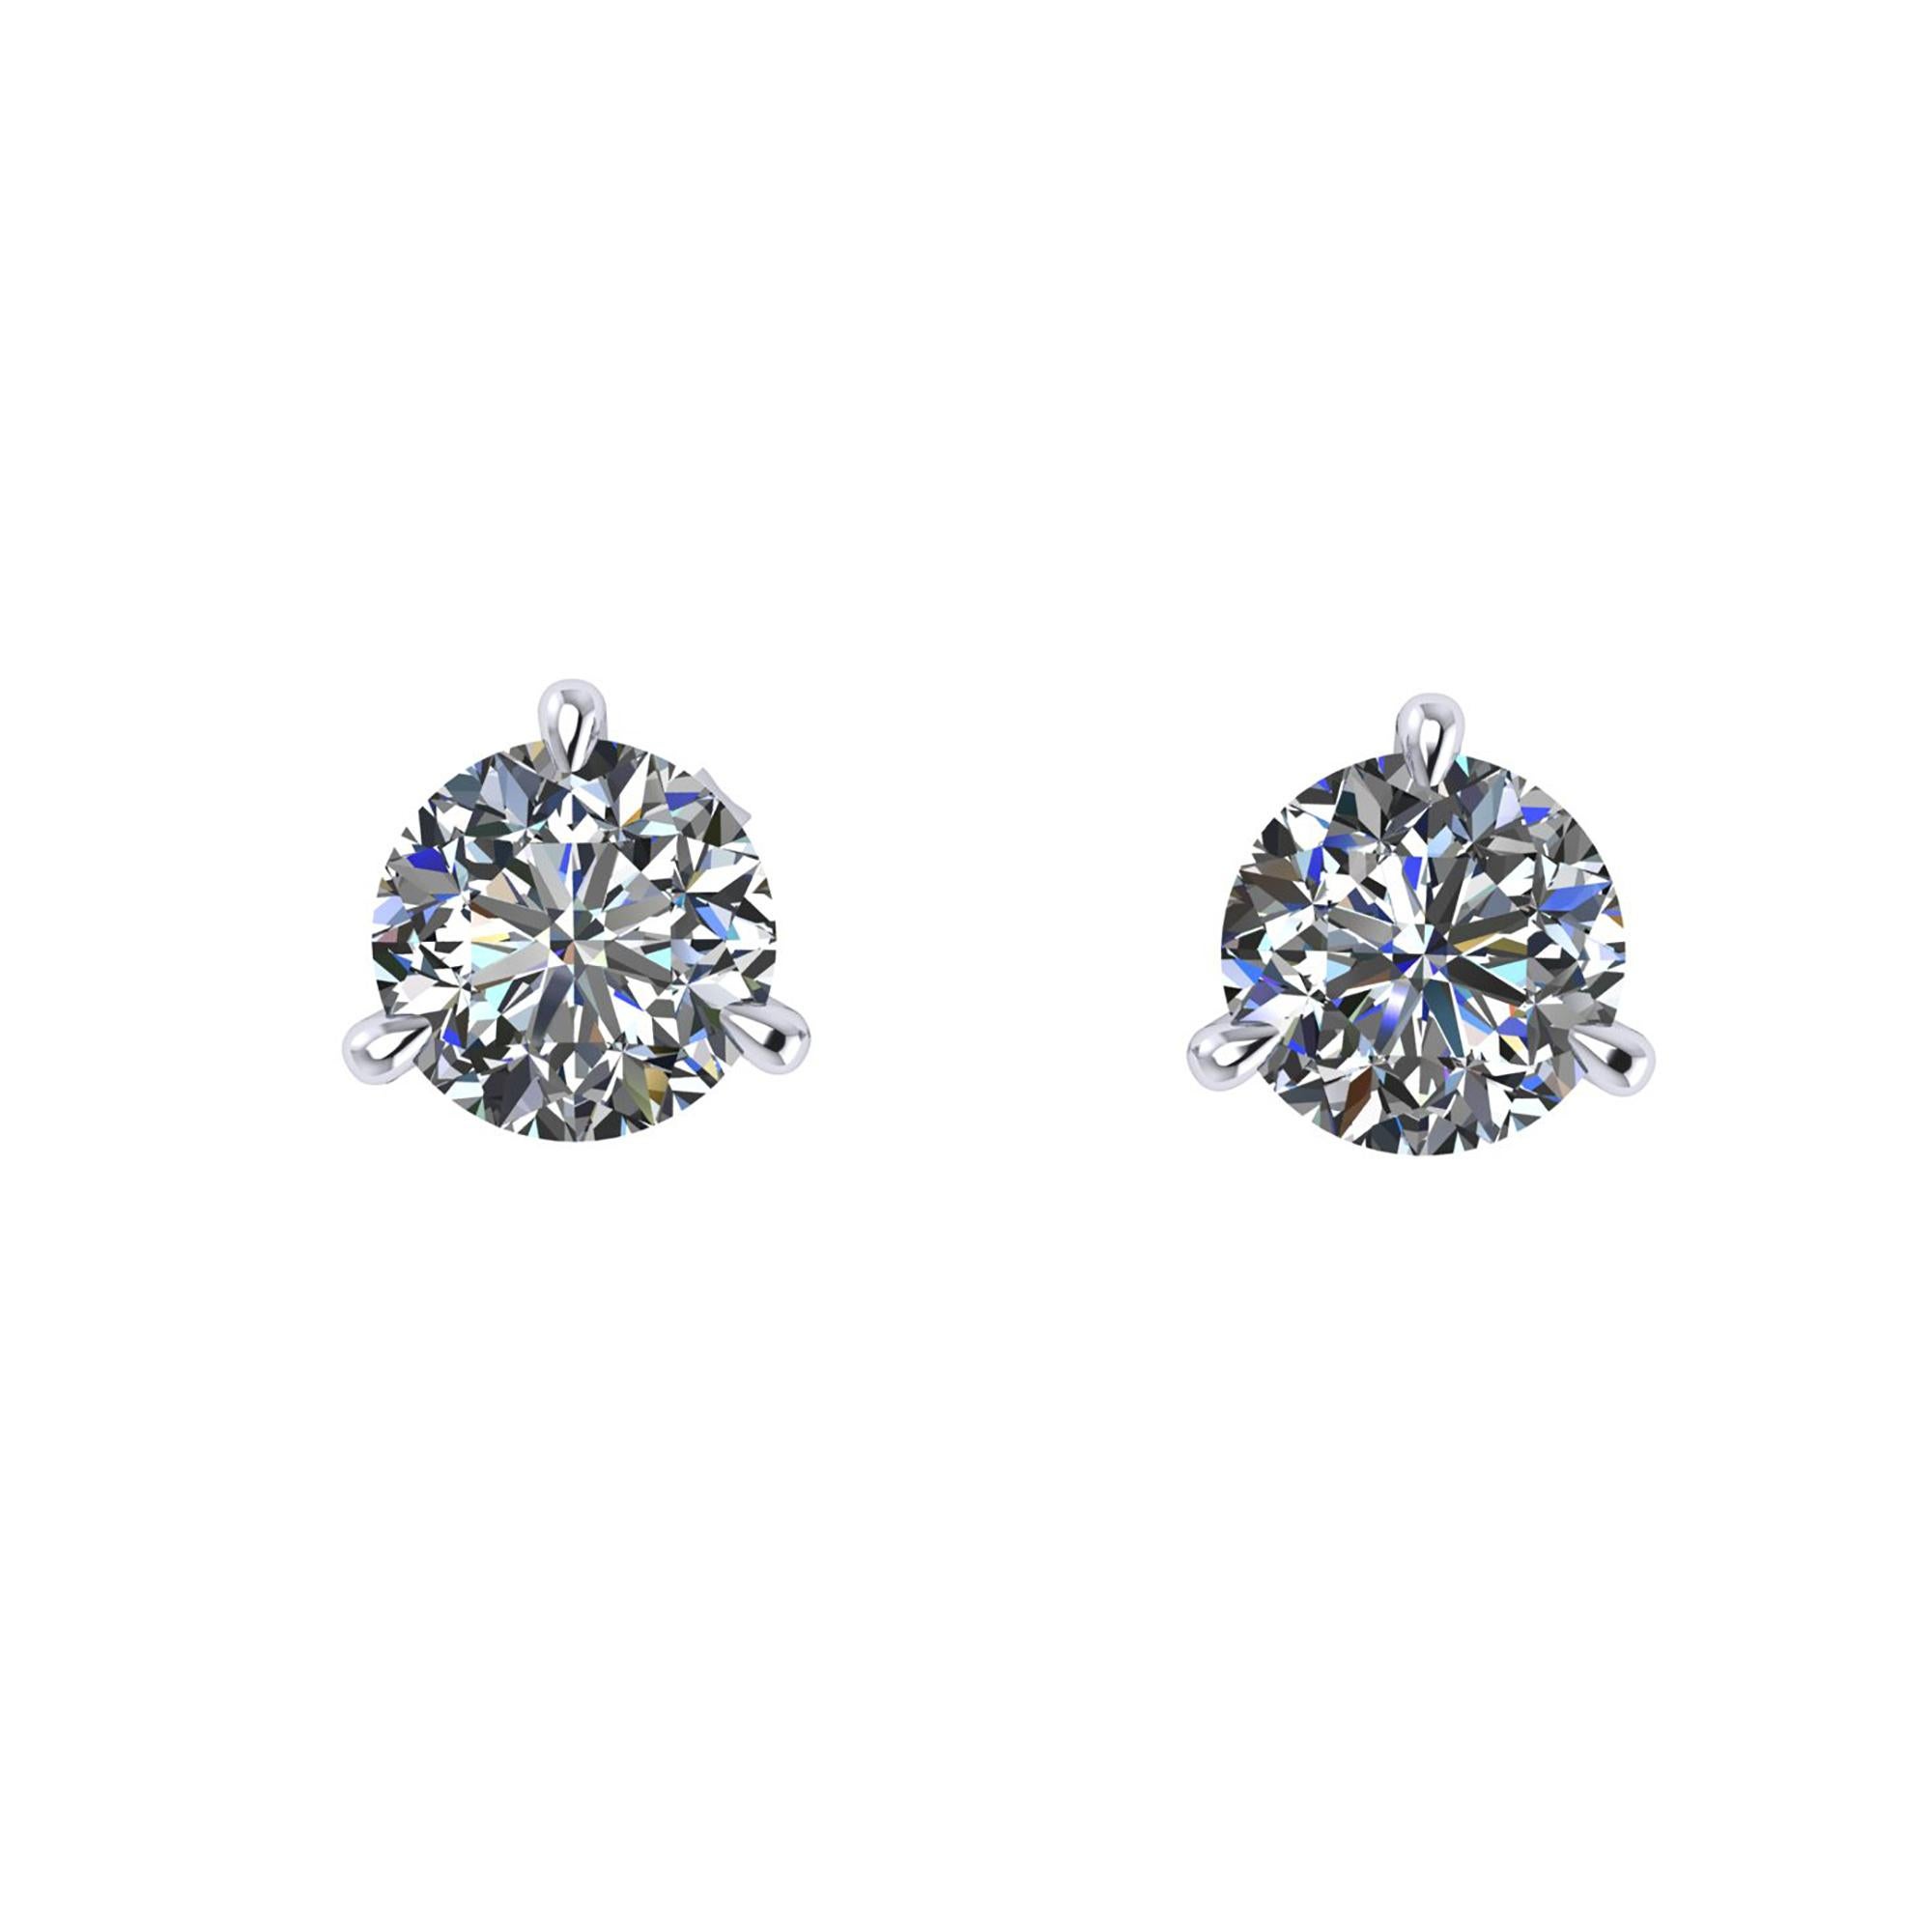 GIA Certified 2.00 Carat D Color Flawless ExExEx Platinum Martini Studs